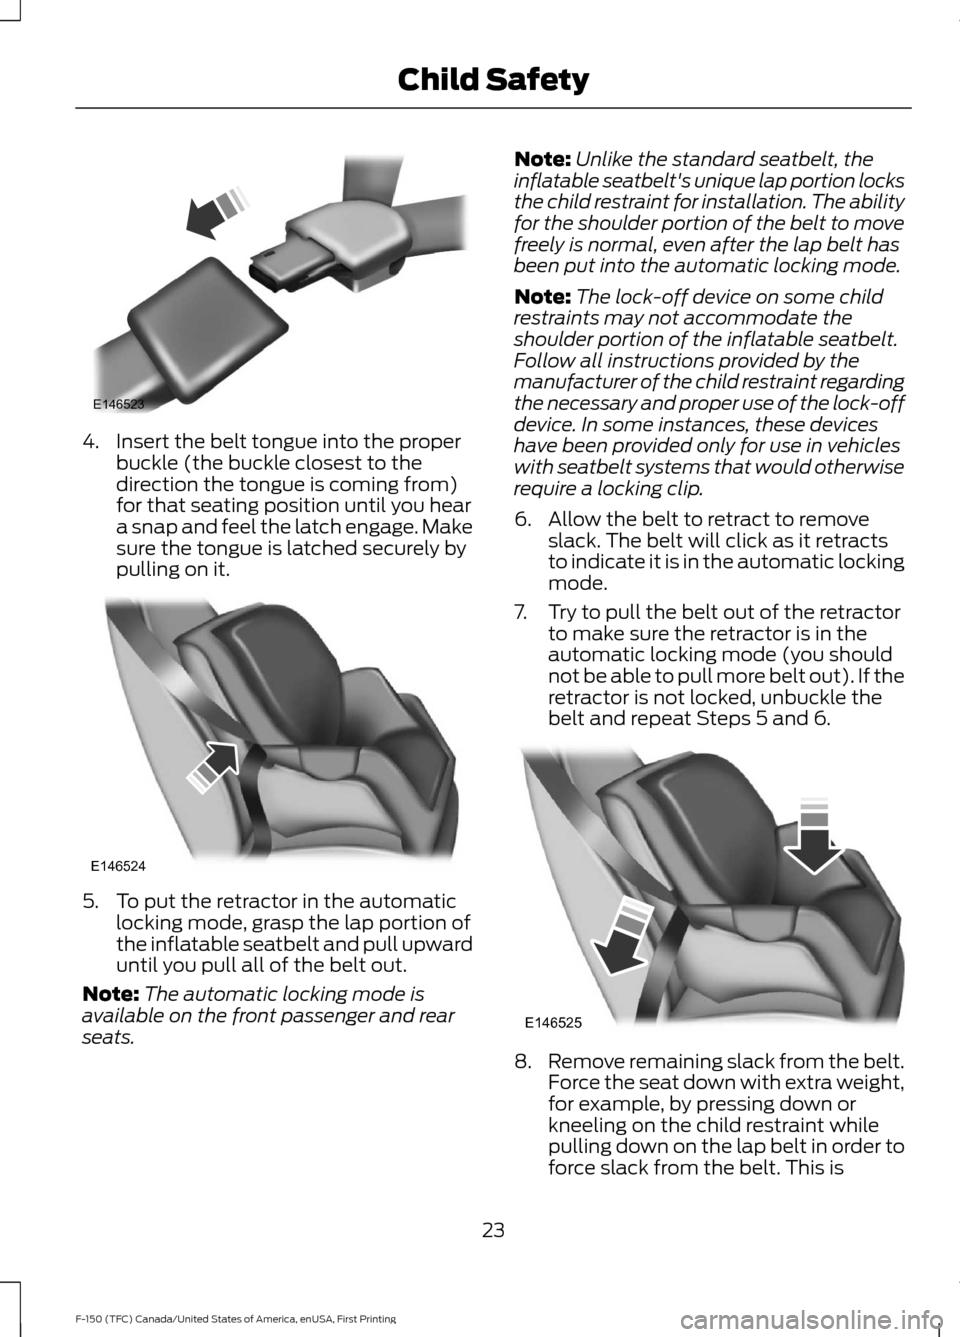 FORD F150 2017 13.G Owners Manual 4. Insert the belt tongue into the proper
buckle (the buckle closest to the
direction the tongue is coming from)
for that seating position until you hear
a snap and feel the latch engage. Make
sure th